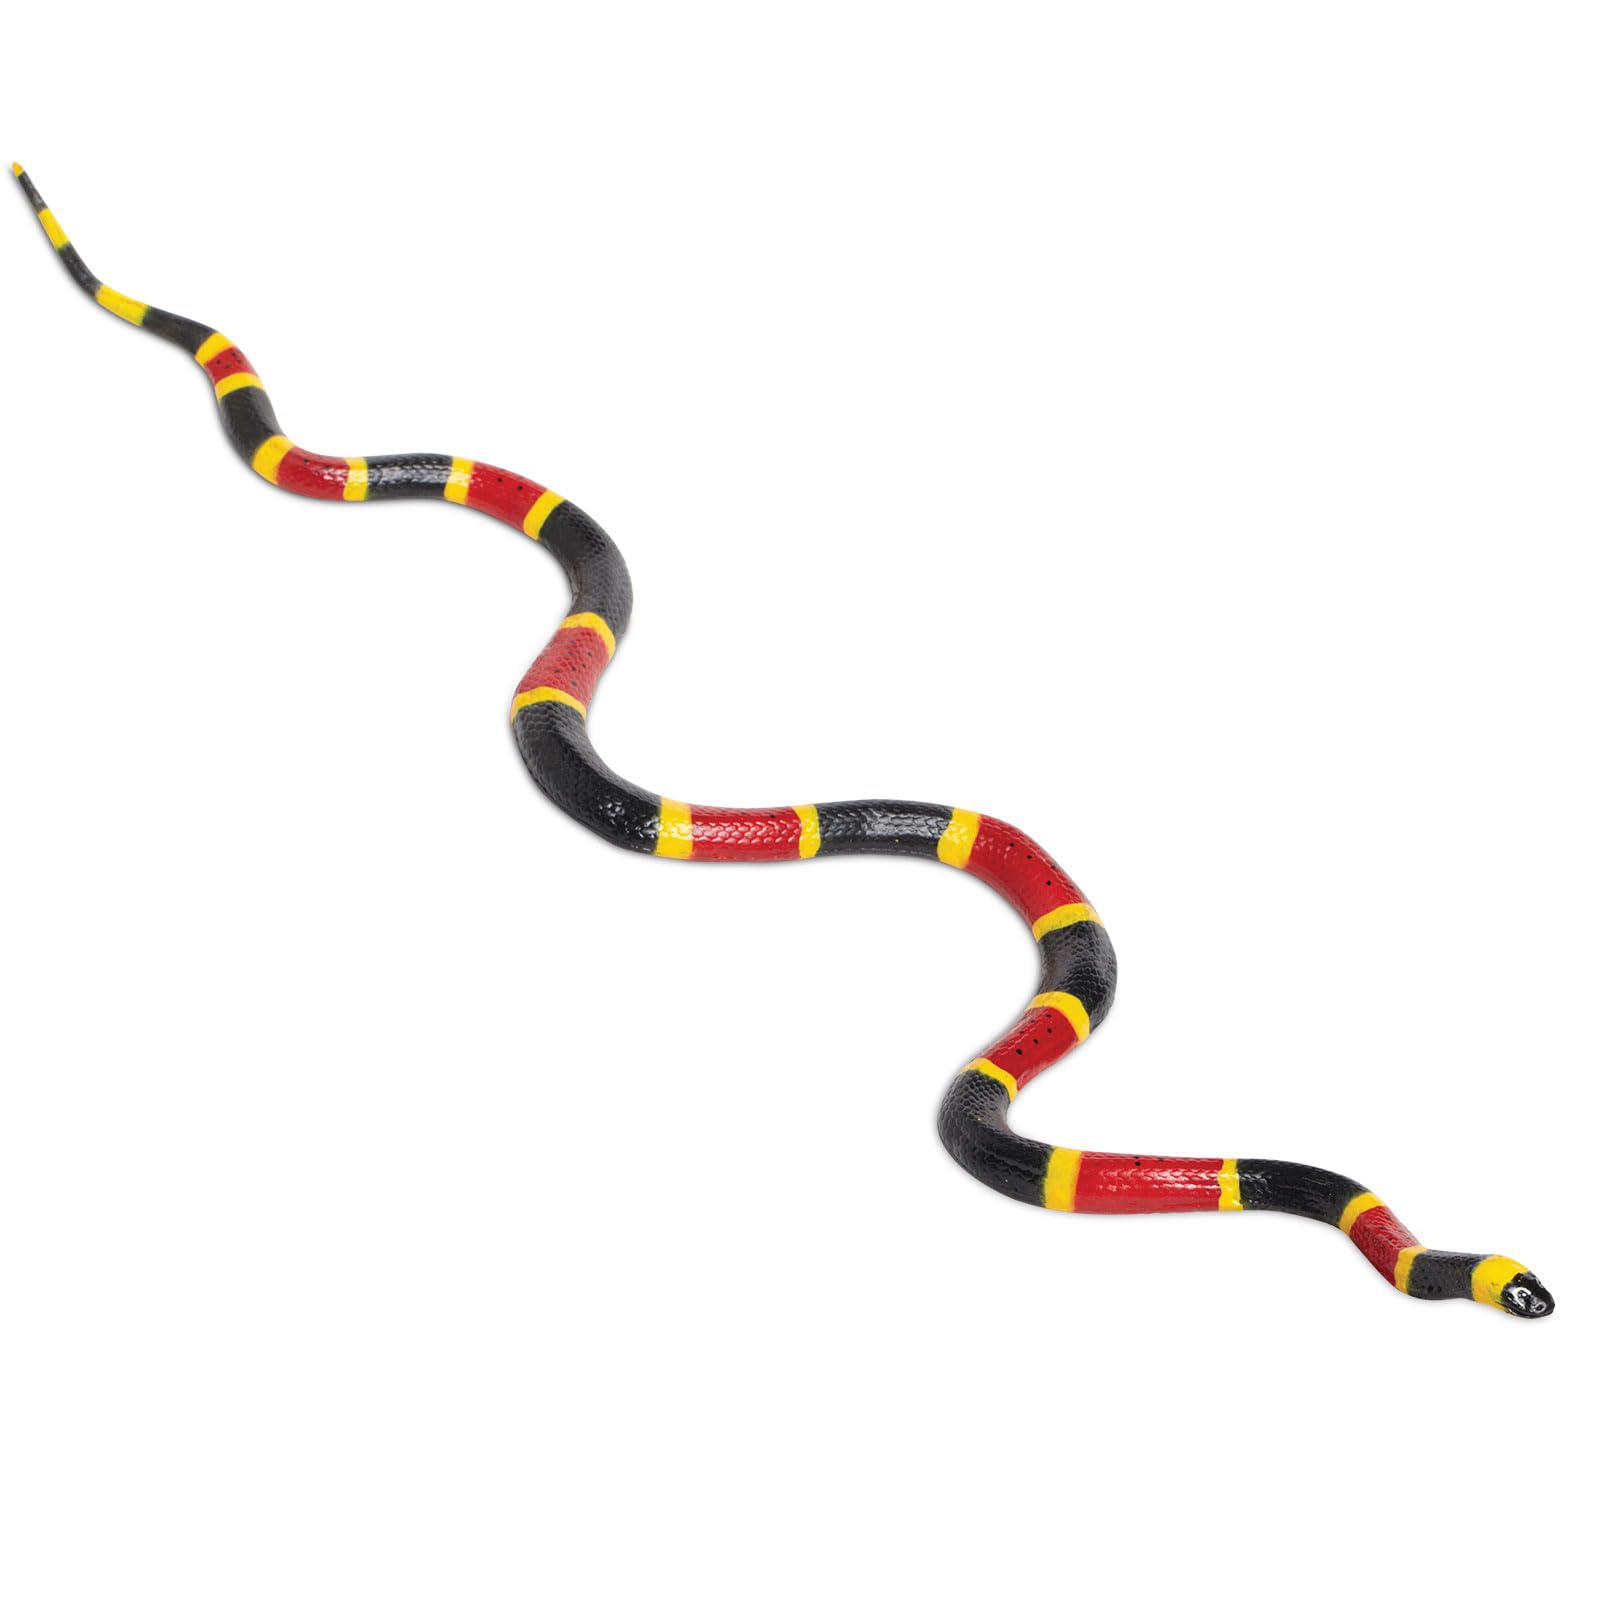 safari ltd. coral snake figurine - detailed 23" plastic model figure - fun educational play toy for boys, girls & kids ages 1